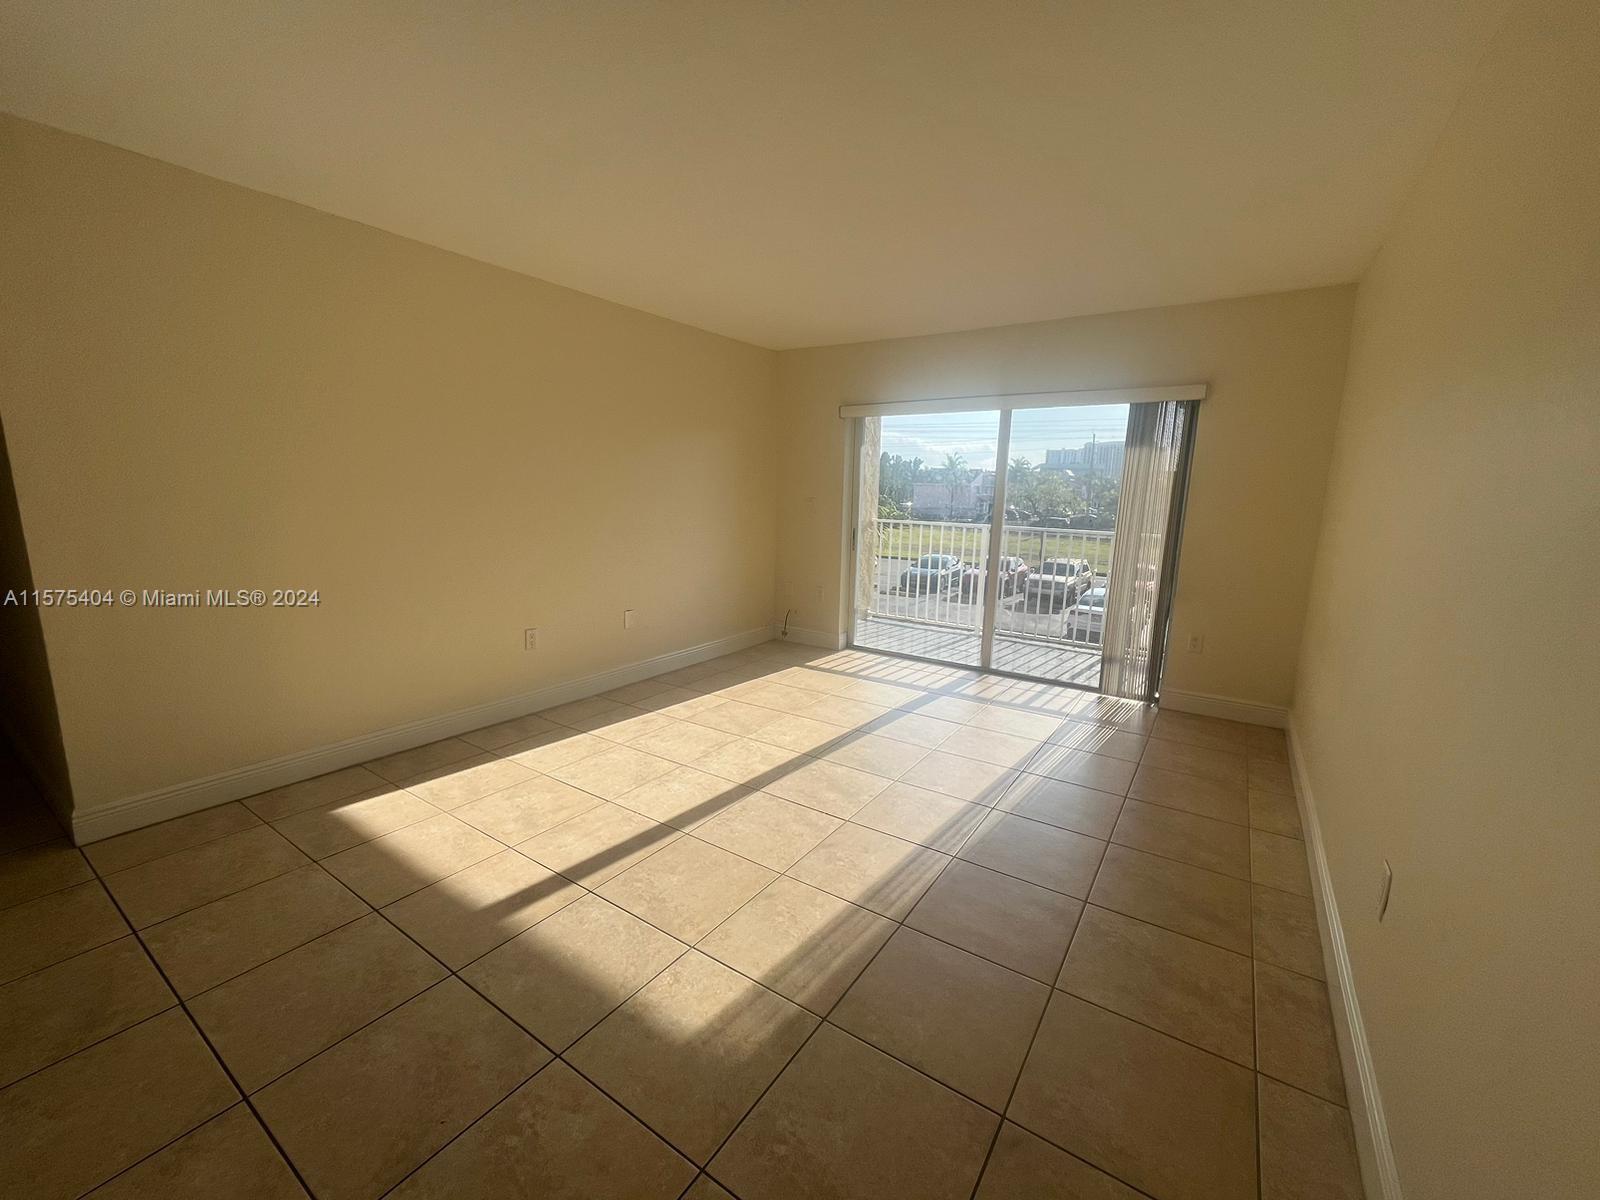 Photo of 79 Ave NW 5112 #202 in Doral, FL